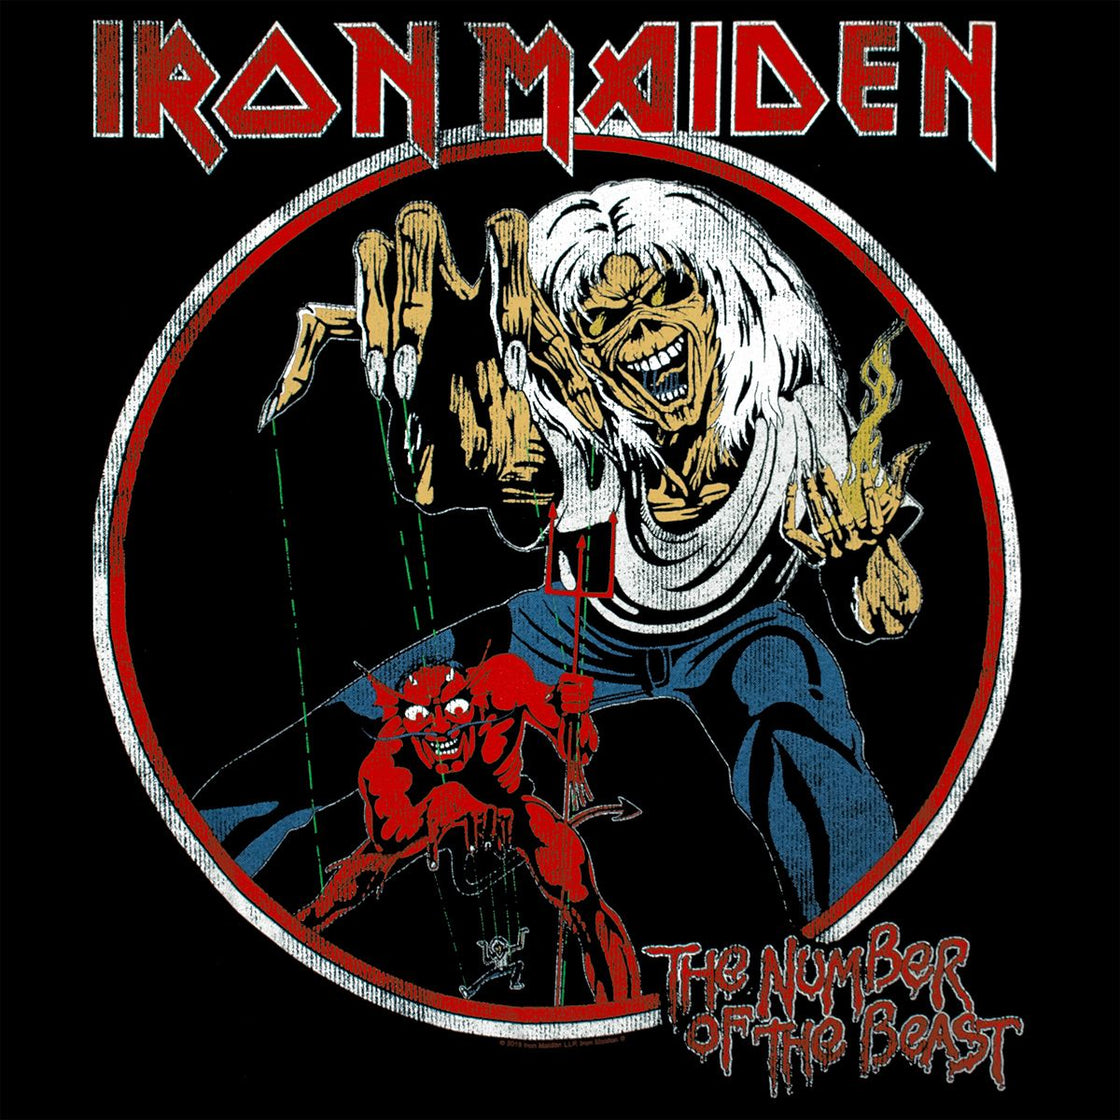 T-Shirt Unisexe IRON MAIDEN - Number of The Beast Vintage